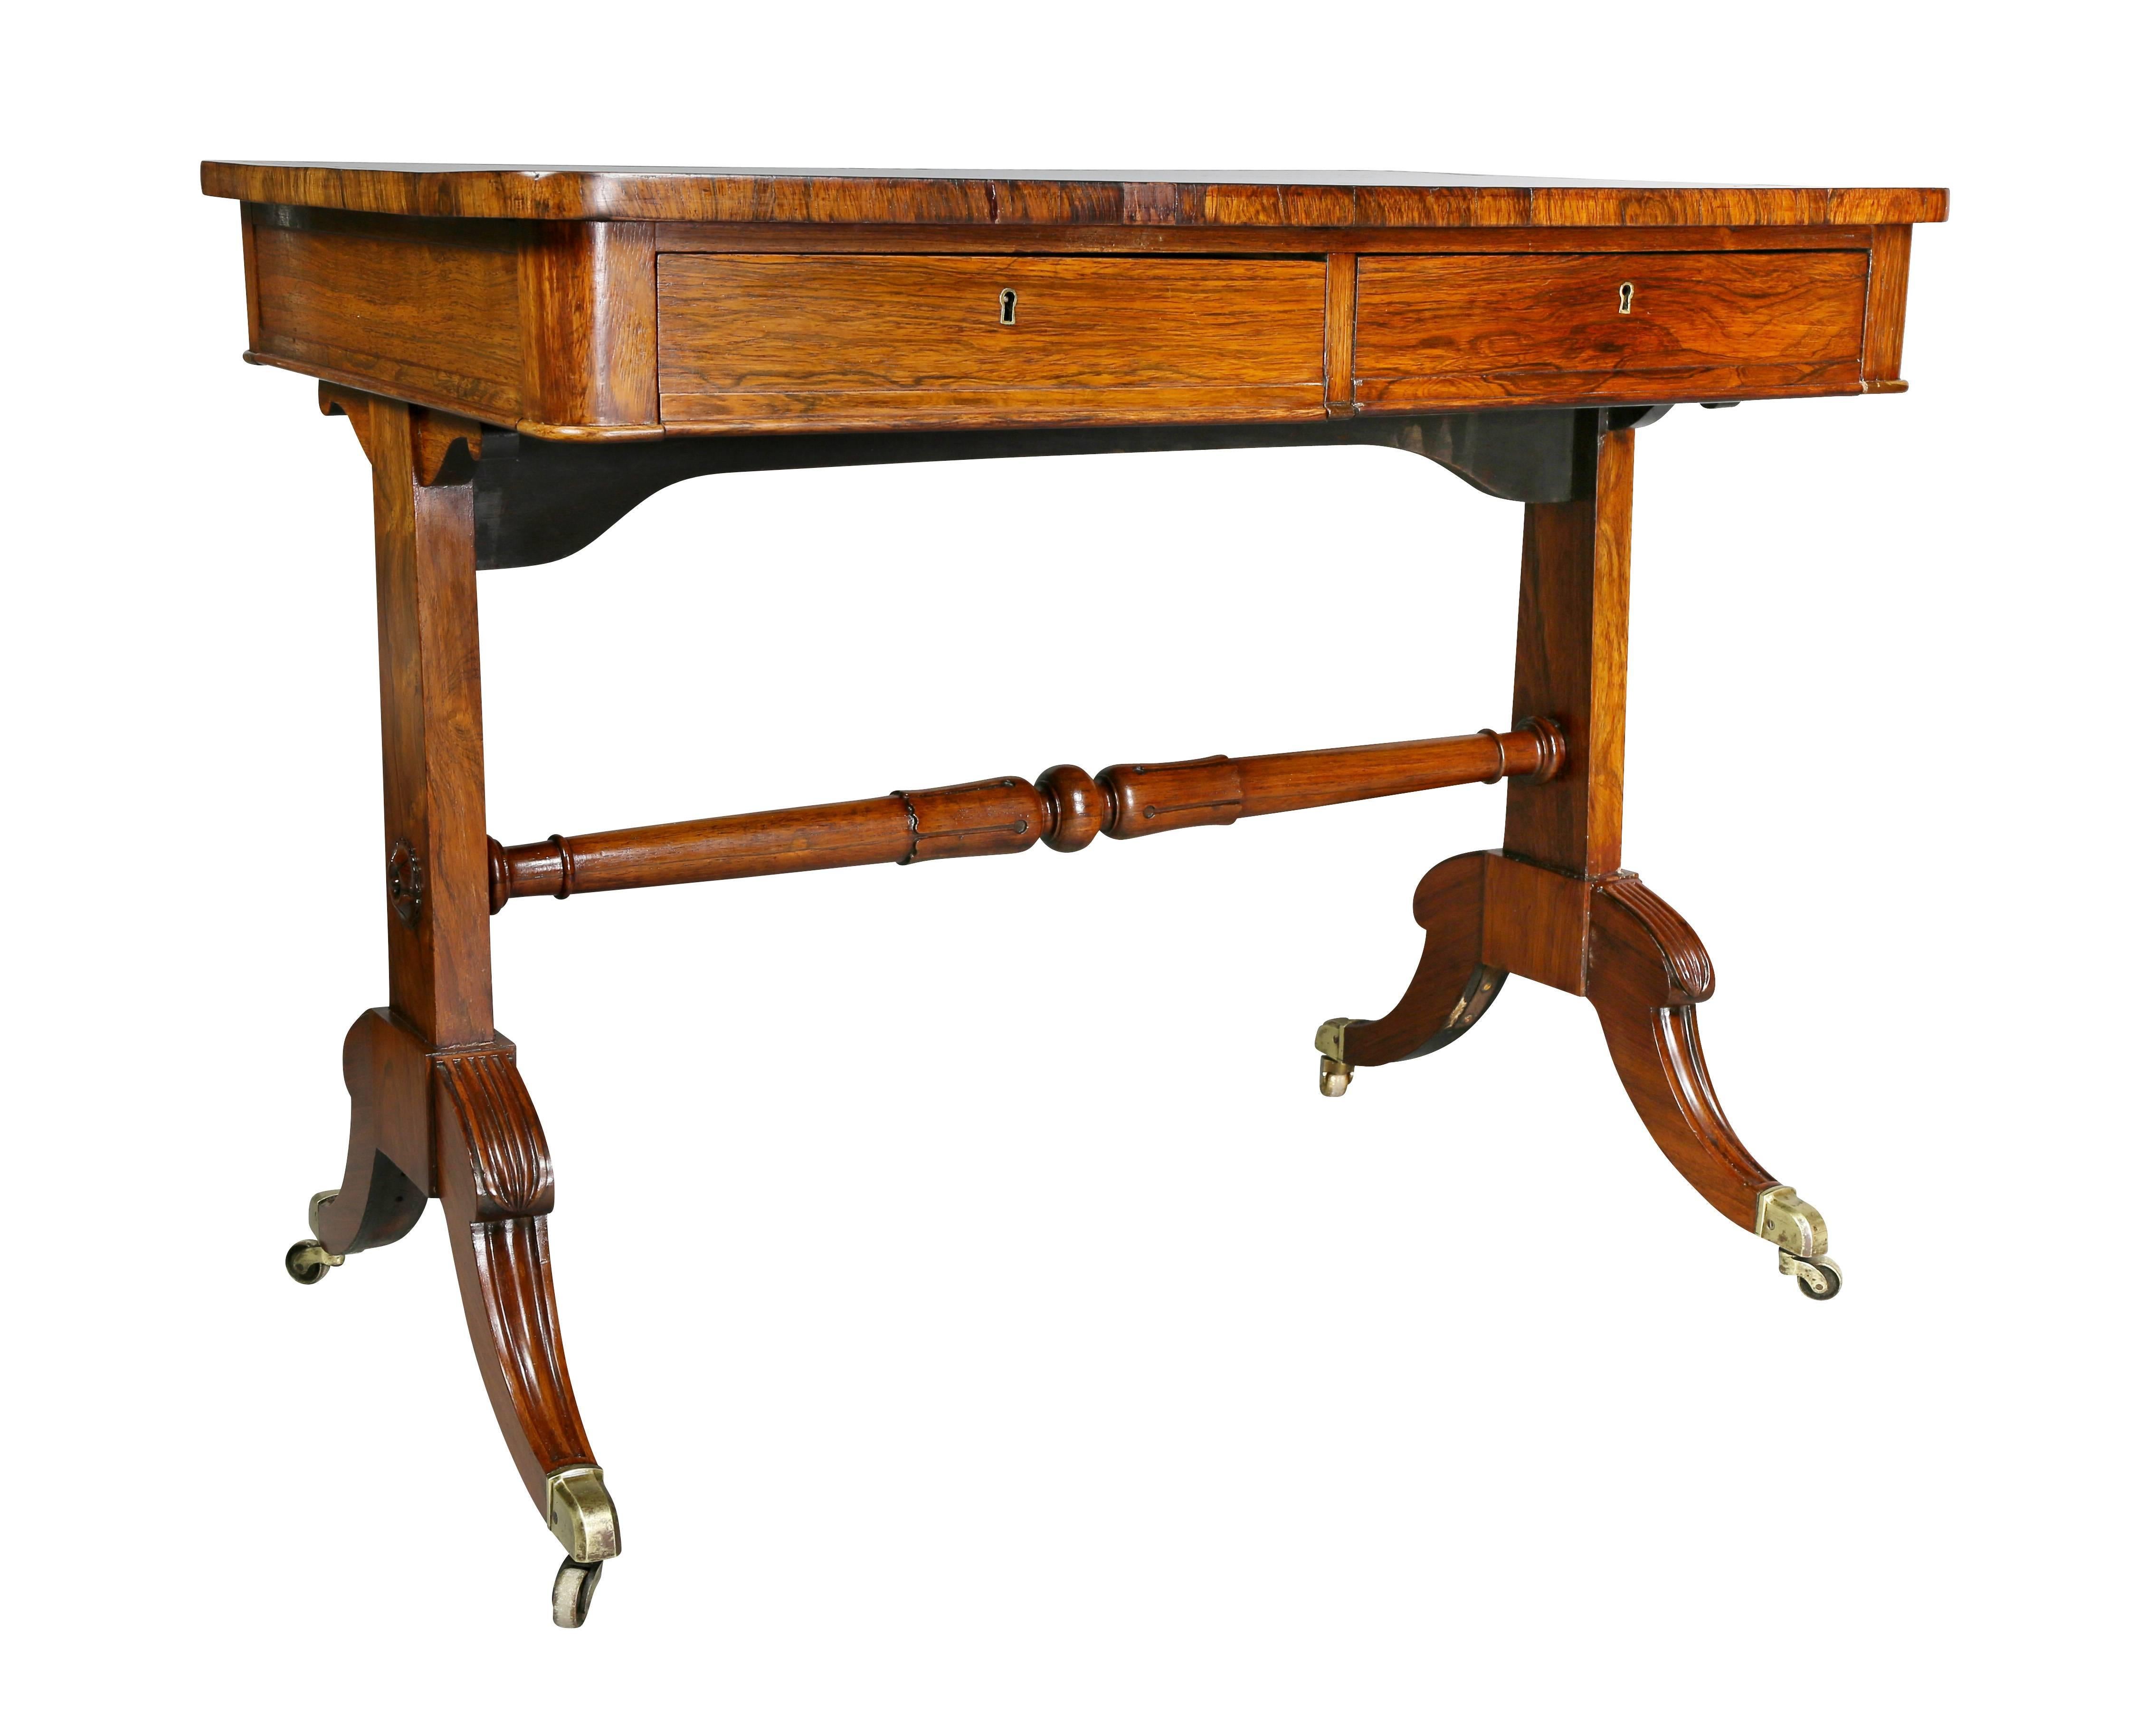 With black inset leather and tooled writing surface over four working drawers  raised on a trestle base with turned stretcher and saber legs and casters.